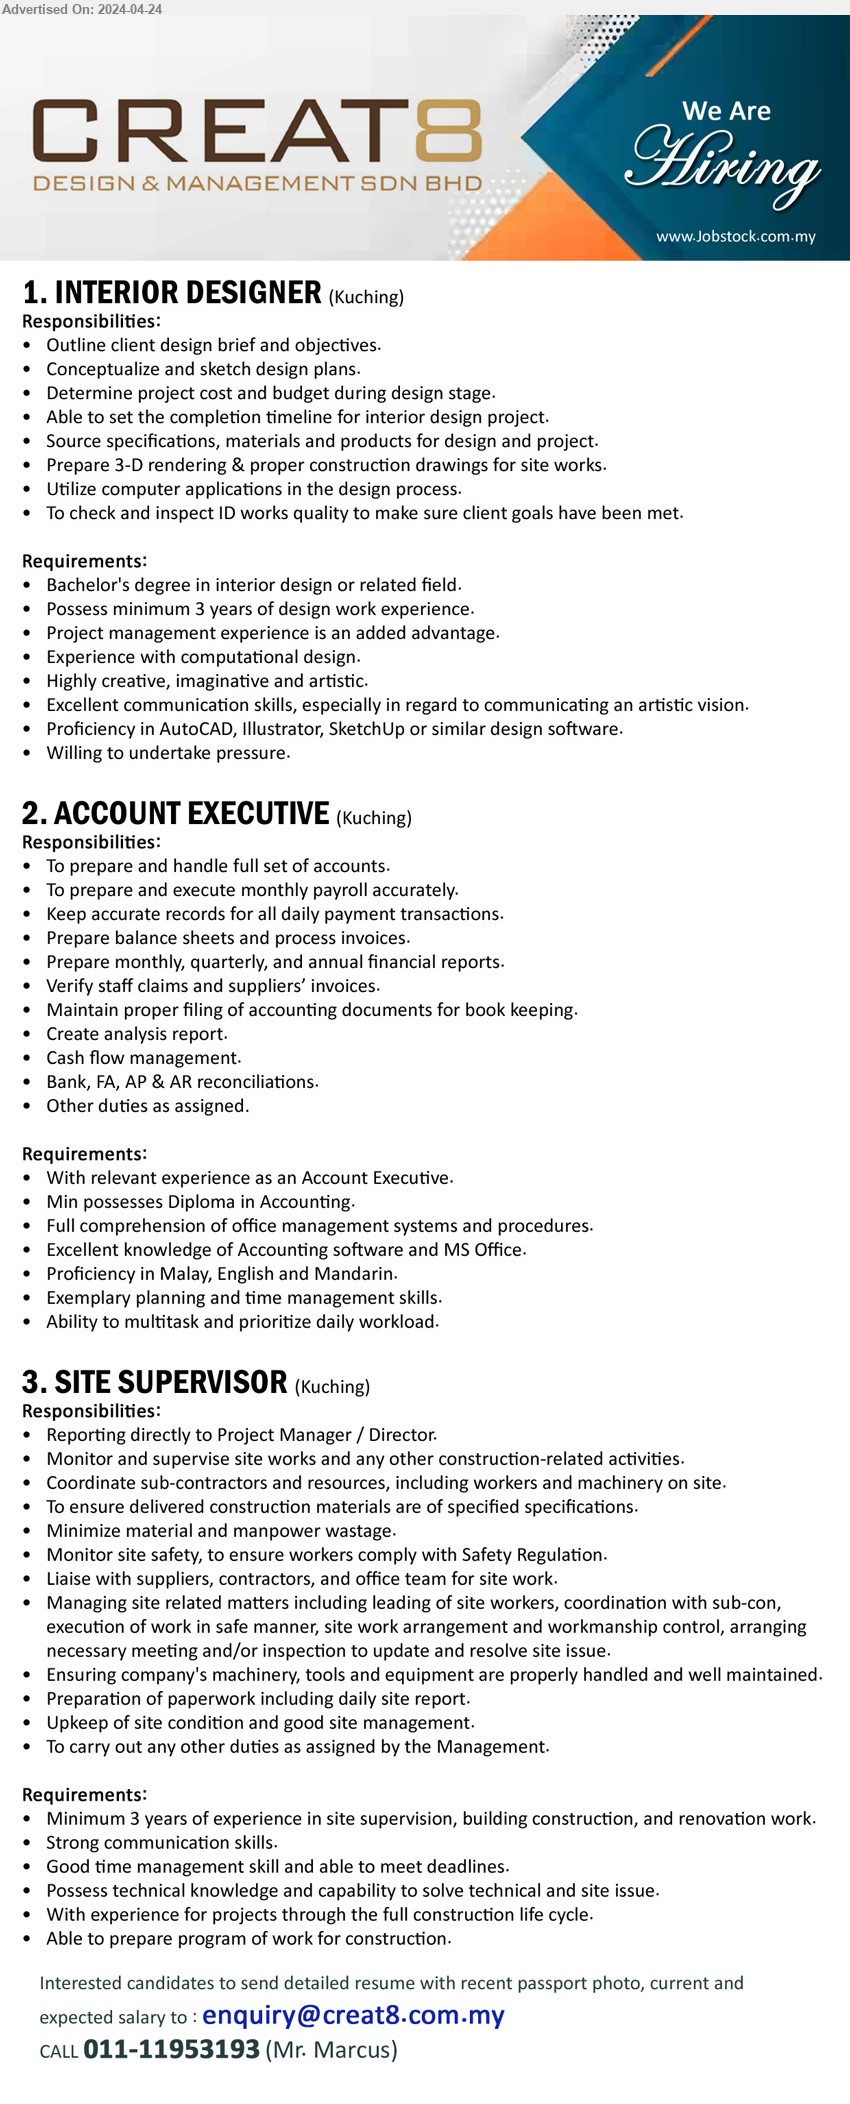 CREAT8 DESIGN & MANAGEMENT SDN BHD - 1. INTERIOR DESIGNER (Kuching), Bachelor's degree in Interior Design, 3 yrs. exp.,...
2. ACCOUNT EXECUTIVE (Kuching), Diploma in Accounting, Excellent knowledge of Accounting software and MS Office,...
3. SITE SUPERVISOR (Kuching), Minimum 3 years of experience in site supervision, building construction, and renovation work.,...
Call 011-11953193 / Email resume to ...